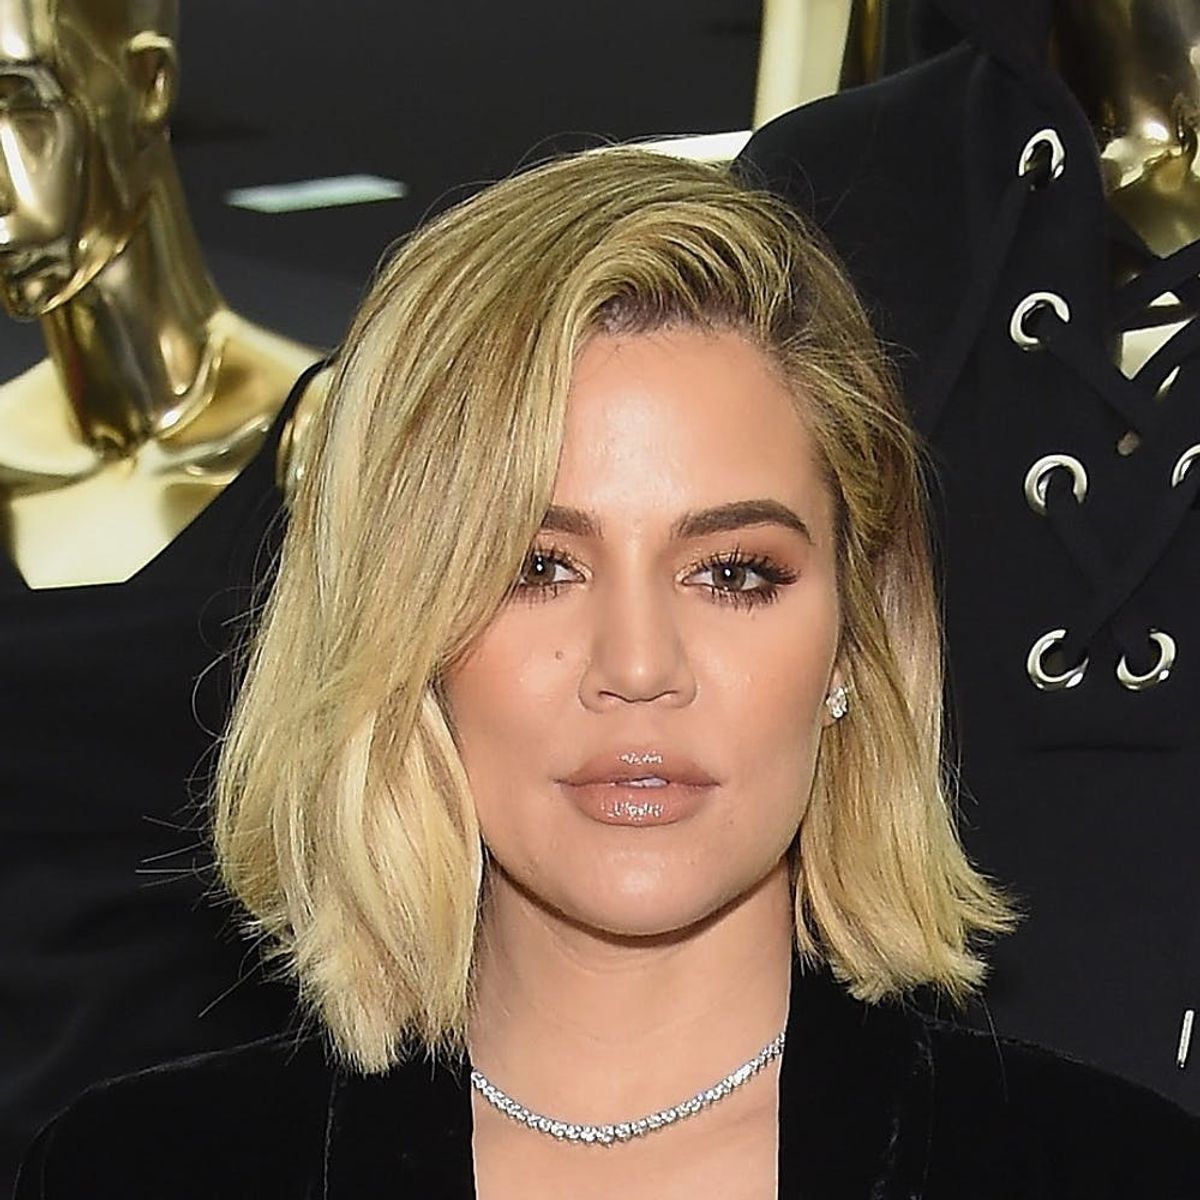 Khloé Kardashian’s Baby Girl Doesn’t Have a Middle Name